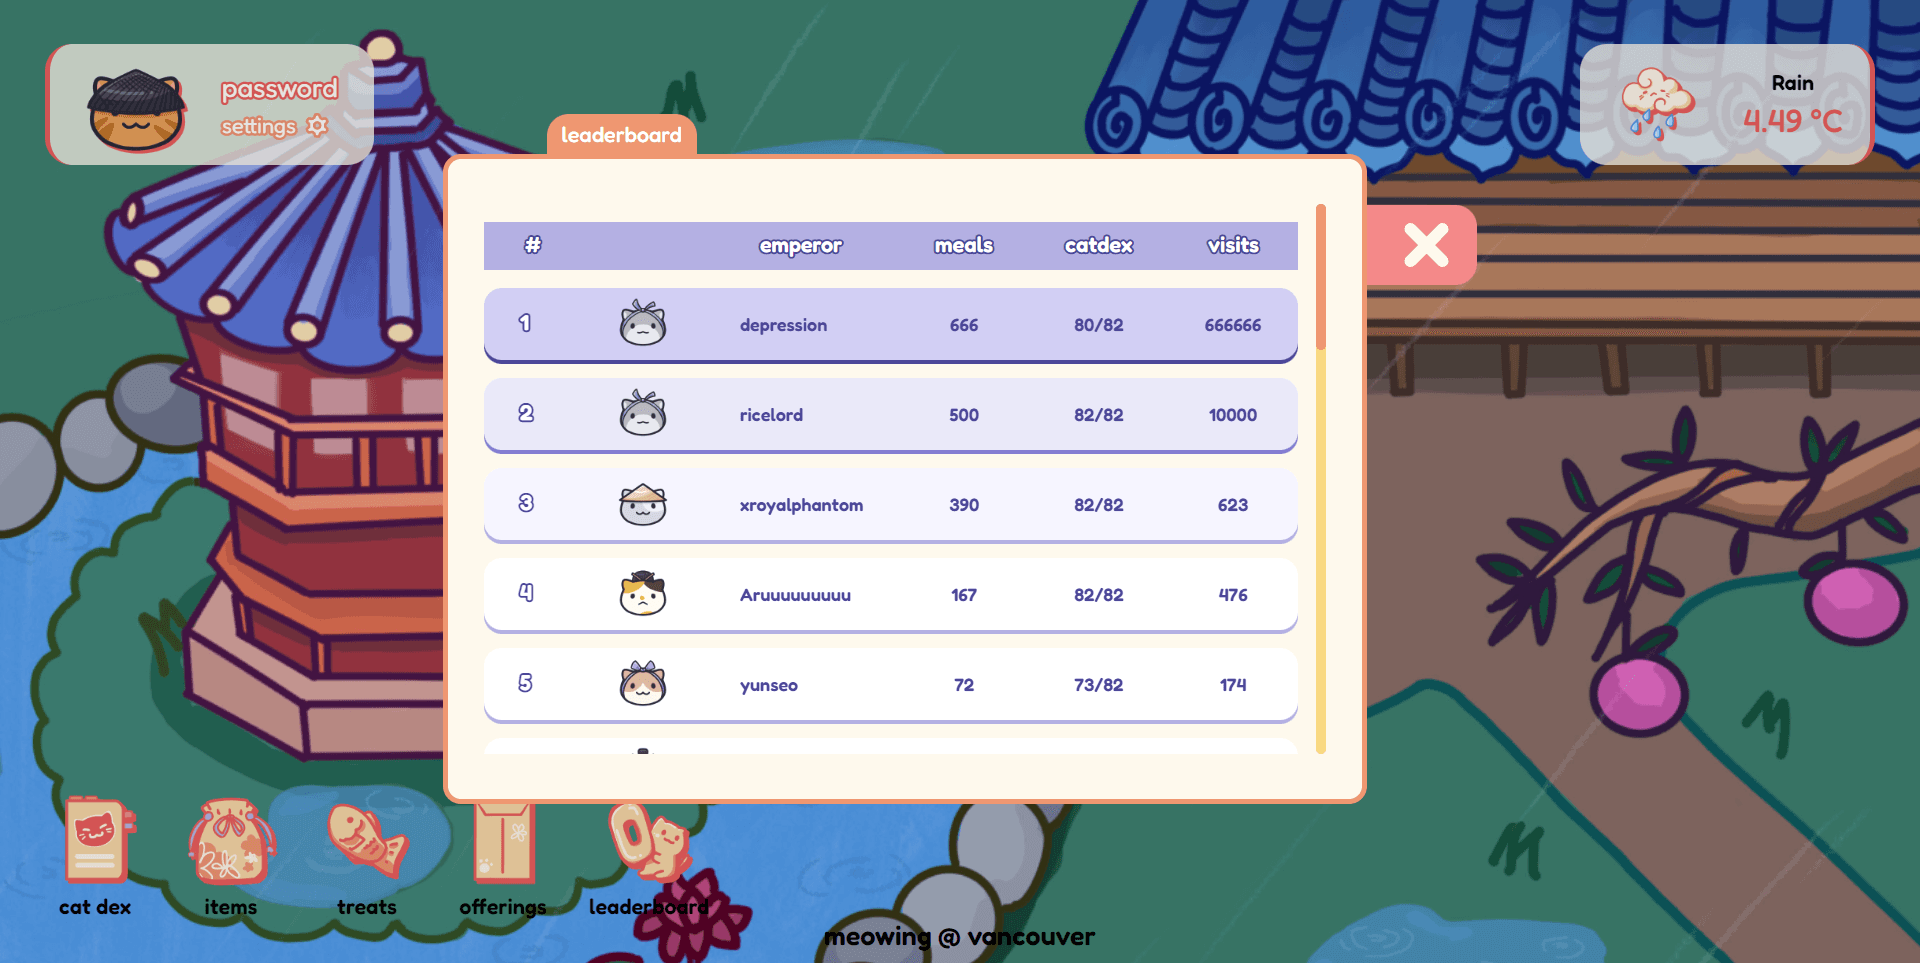 Neko Teikoku's leaderboard displaying the current top users as of right now.